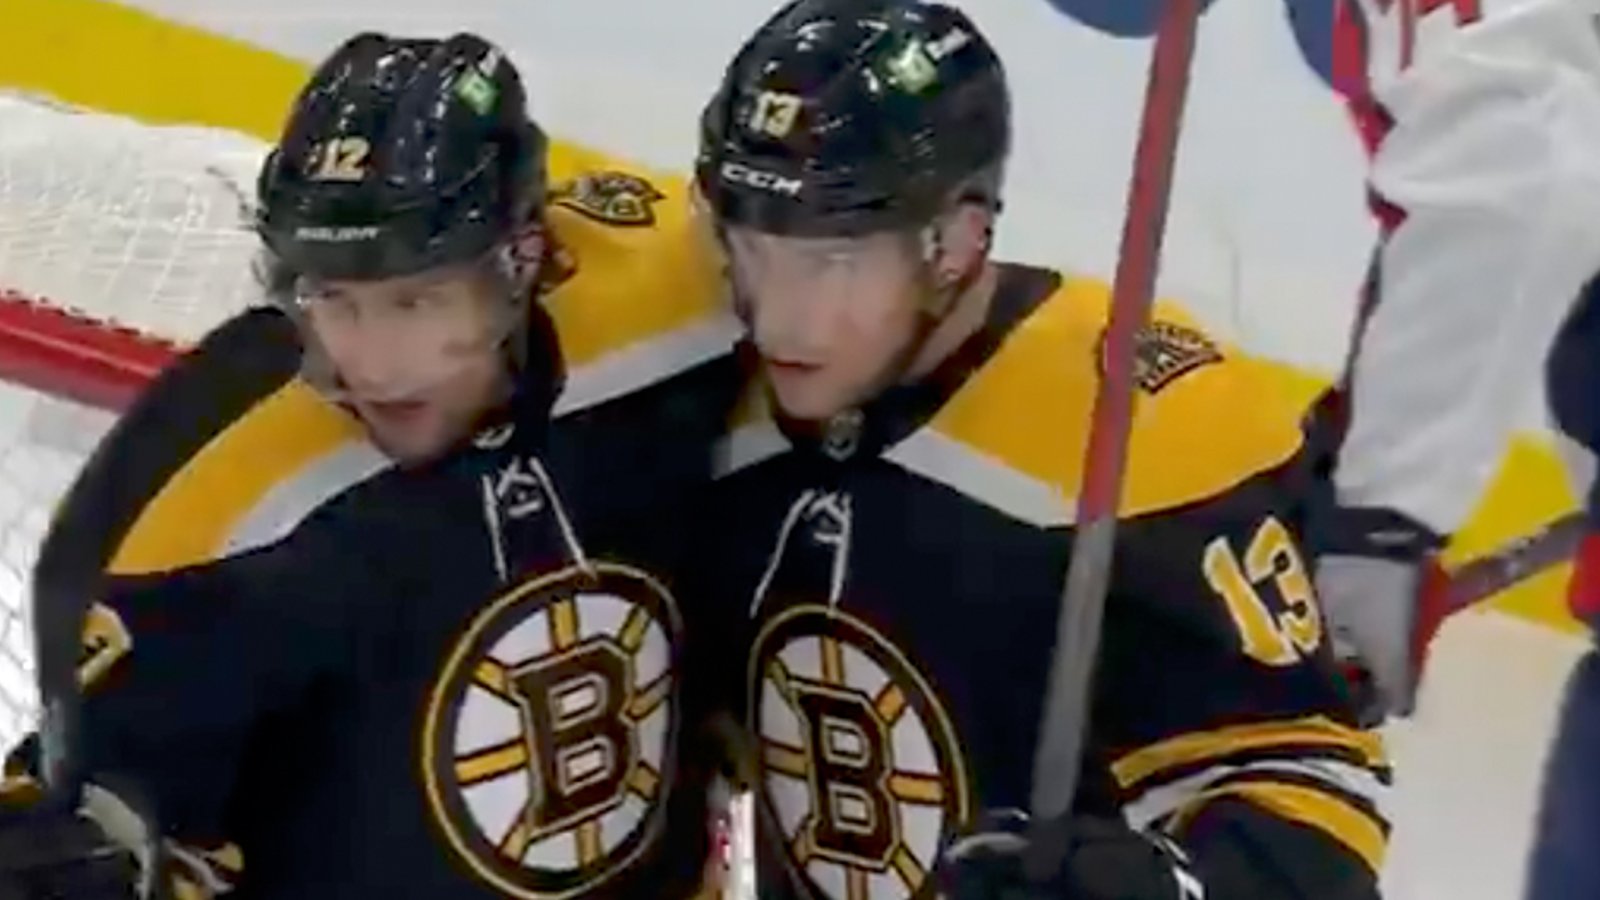 Charlie Coyle tallies in his return to the lineup (VIDEO)